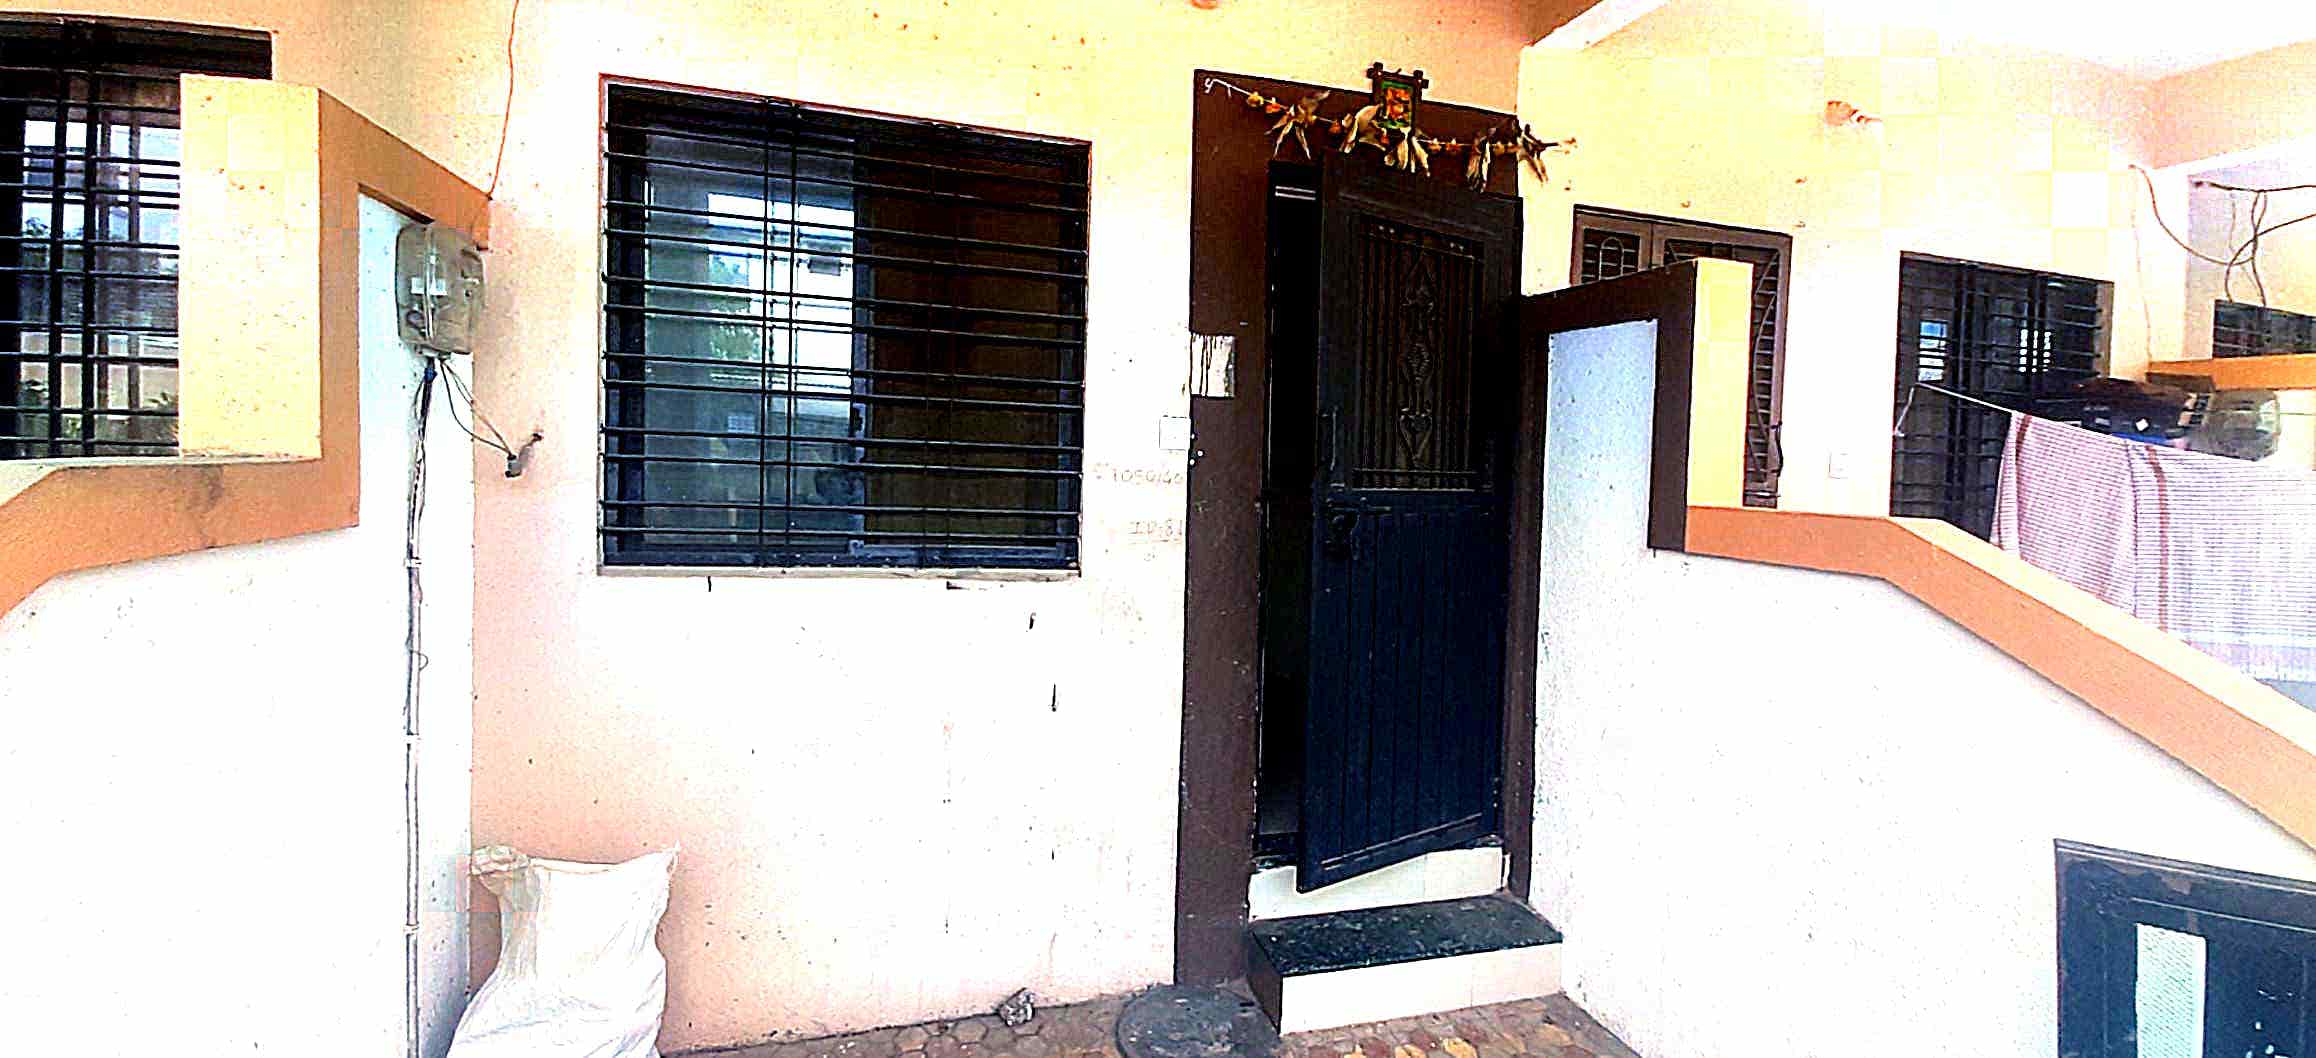 Independent House for Rent 1100 Sq. Feet at Nashik, Cidco Colony